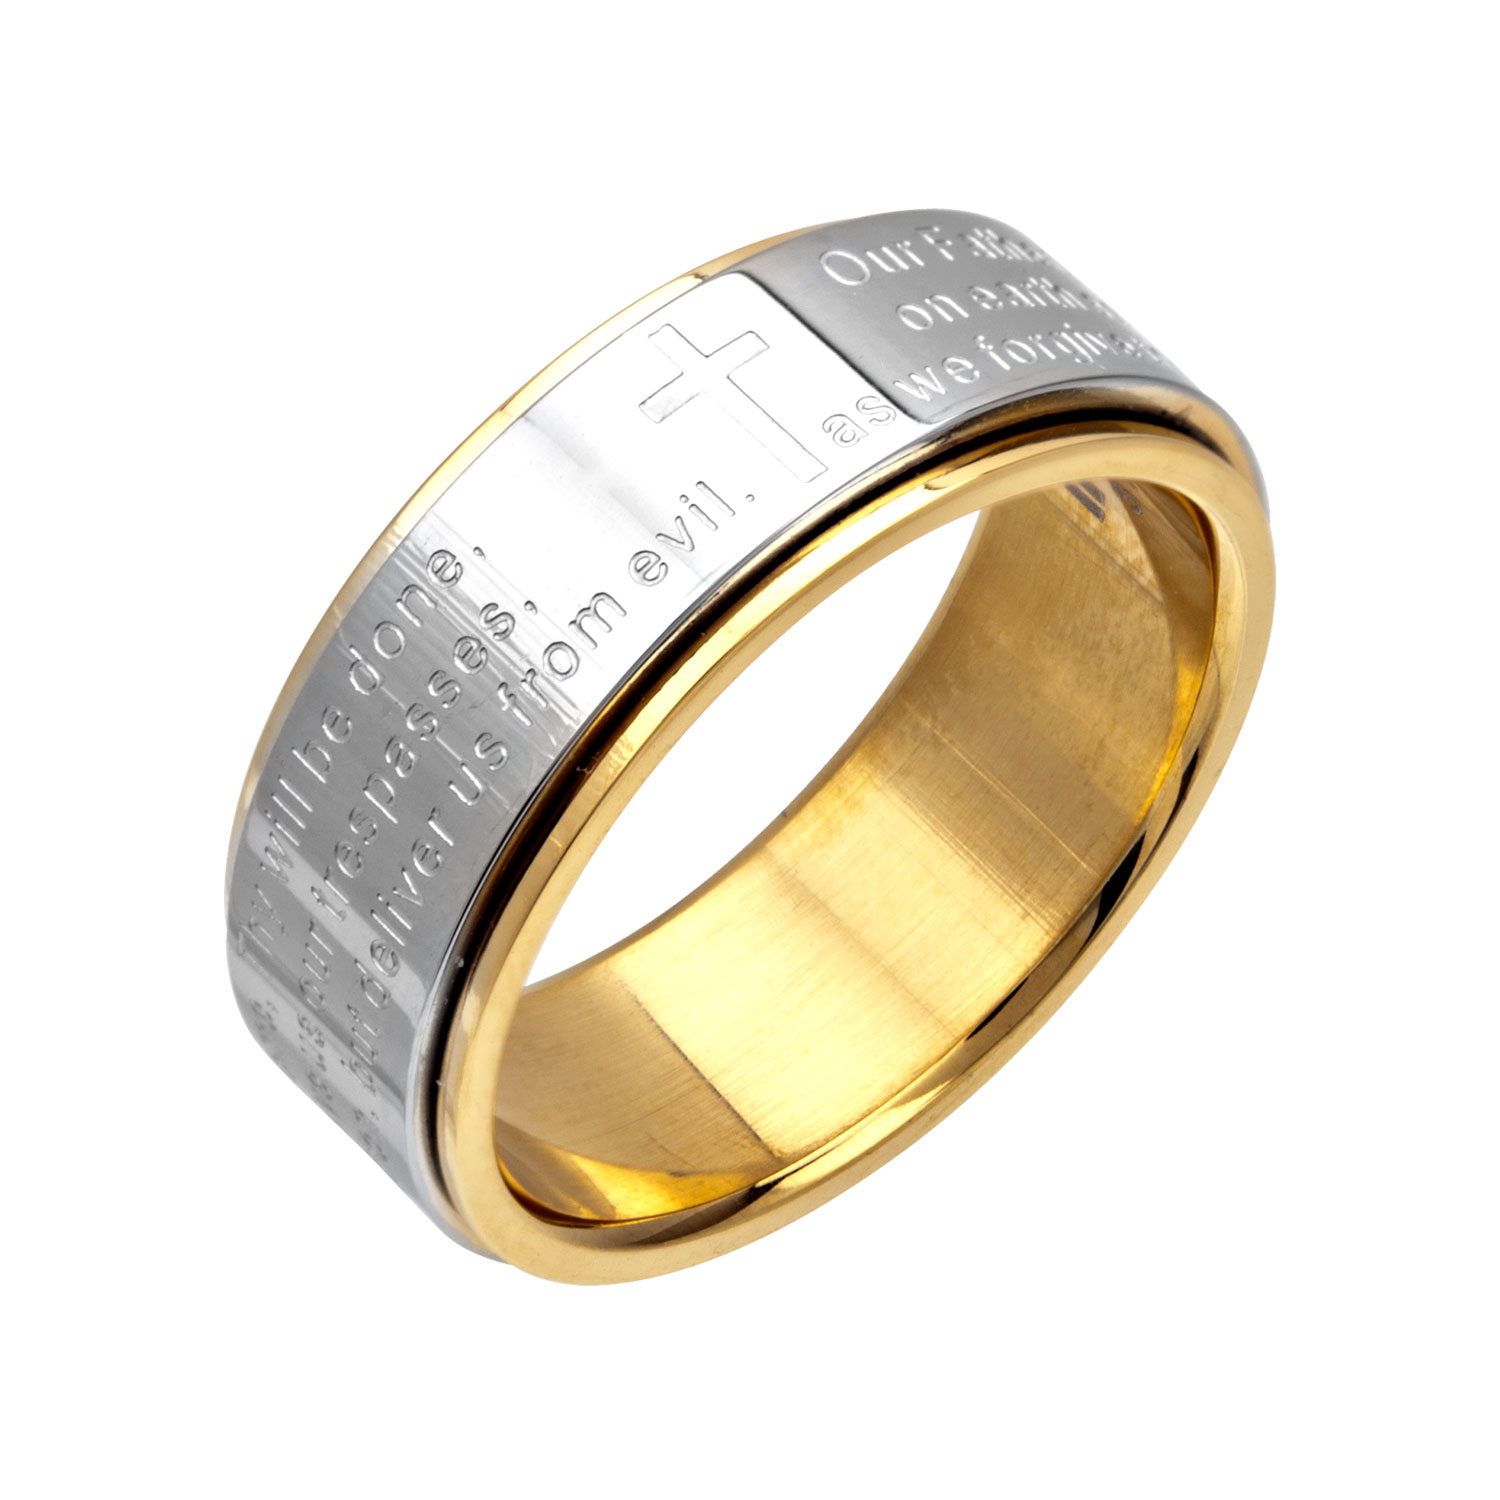 Gold Plated Center Lord's Prayer Spinner Ring Thurber's Fine Jewelry Wadsworth, OH